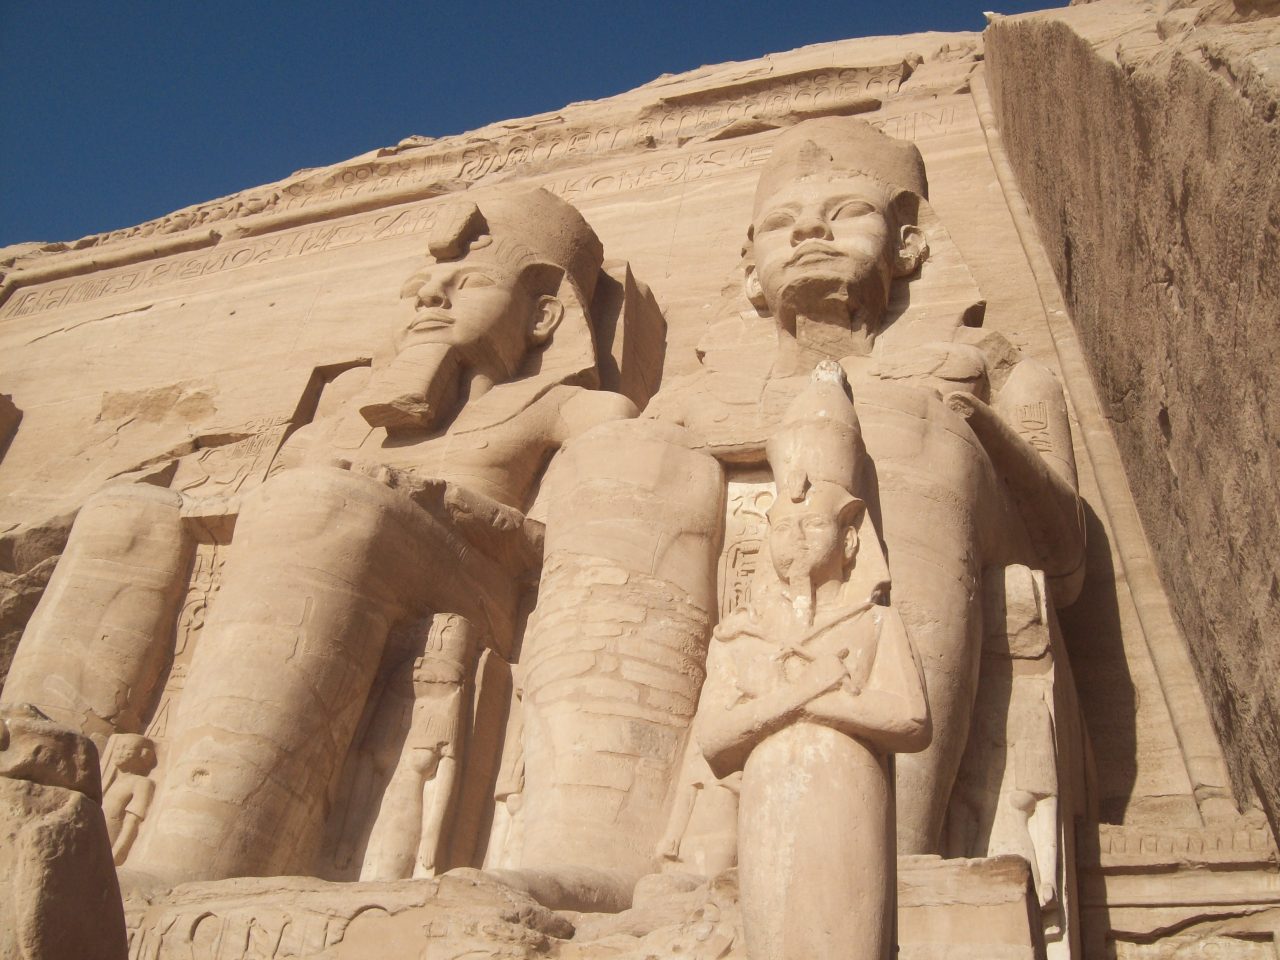 Egypt operates 171 flights, reopens 5 museums and 8 archaeological sites.